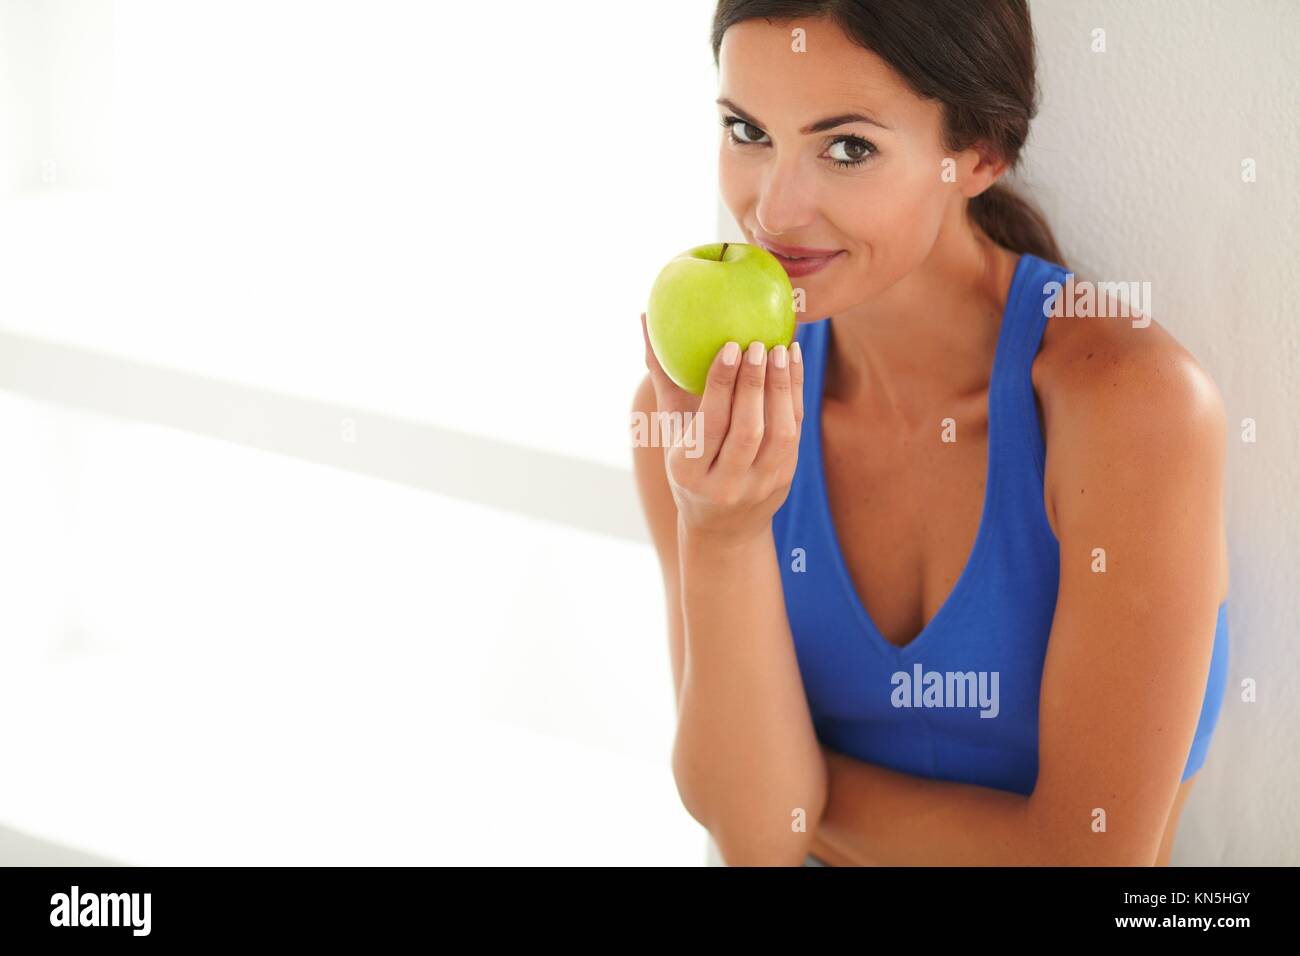 Adult woman in sports clothing holding food and looking at you. Stock Photo